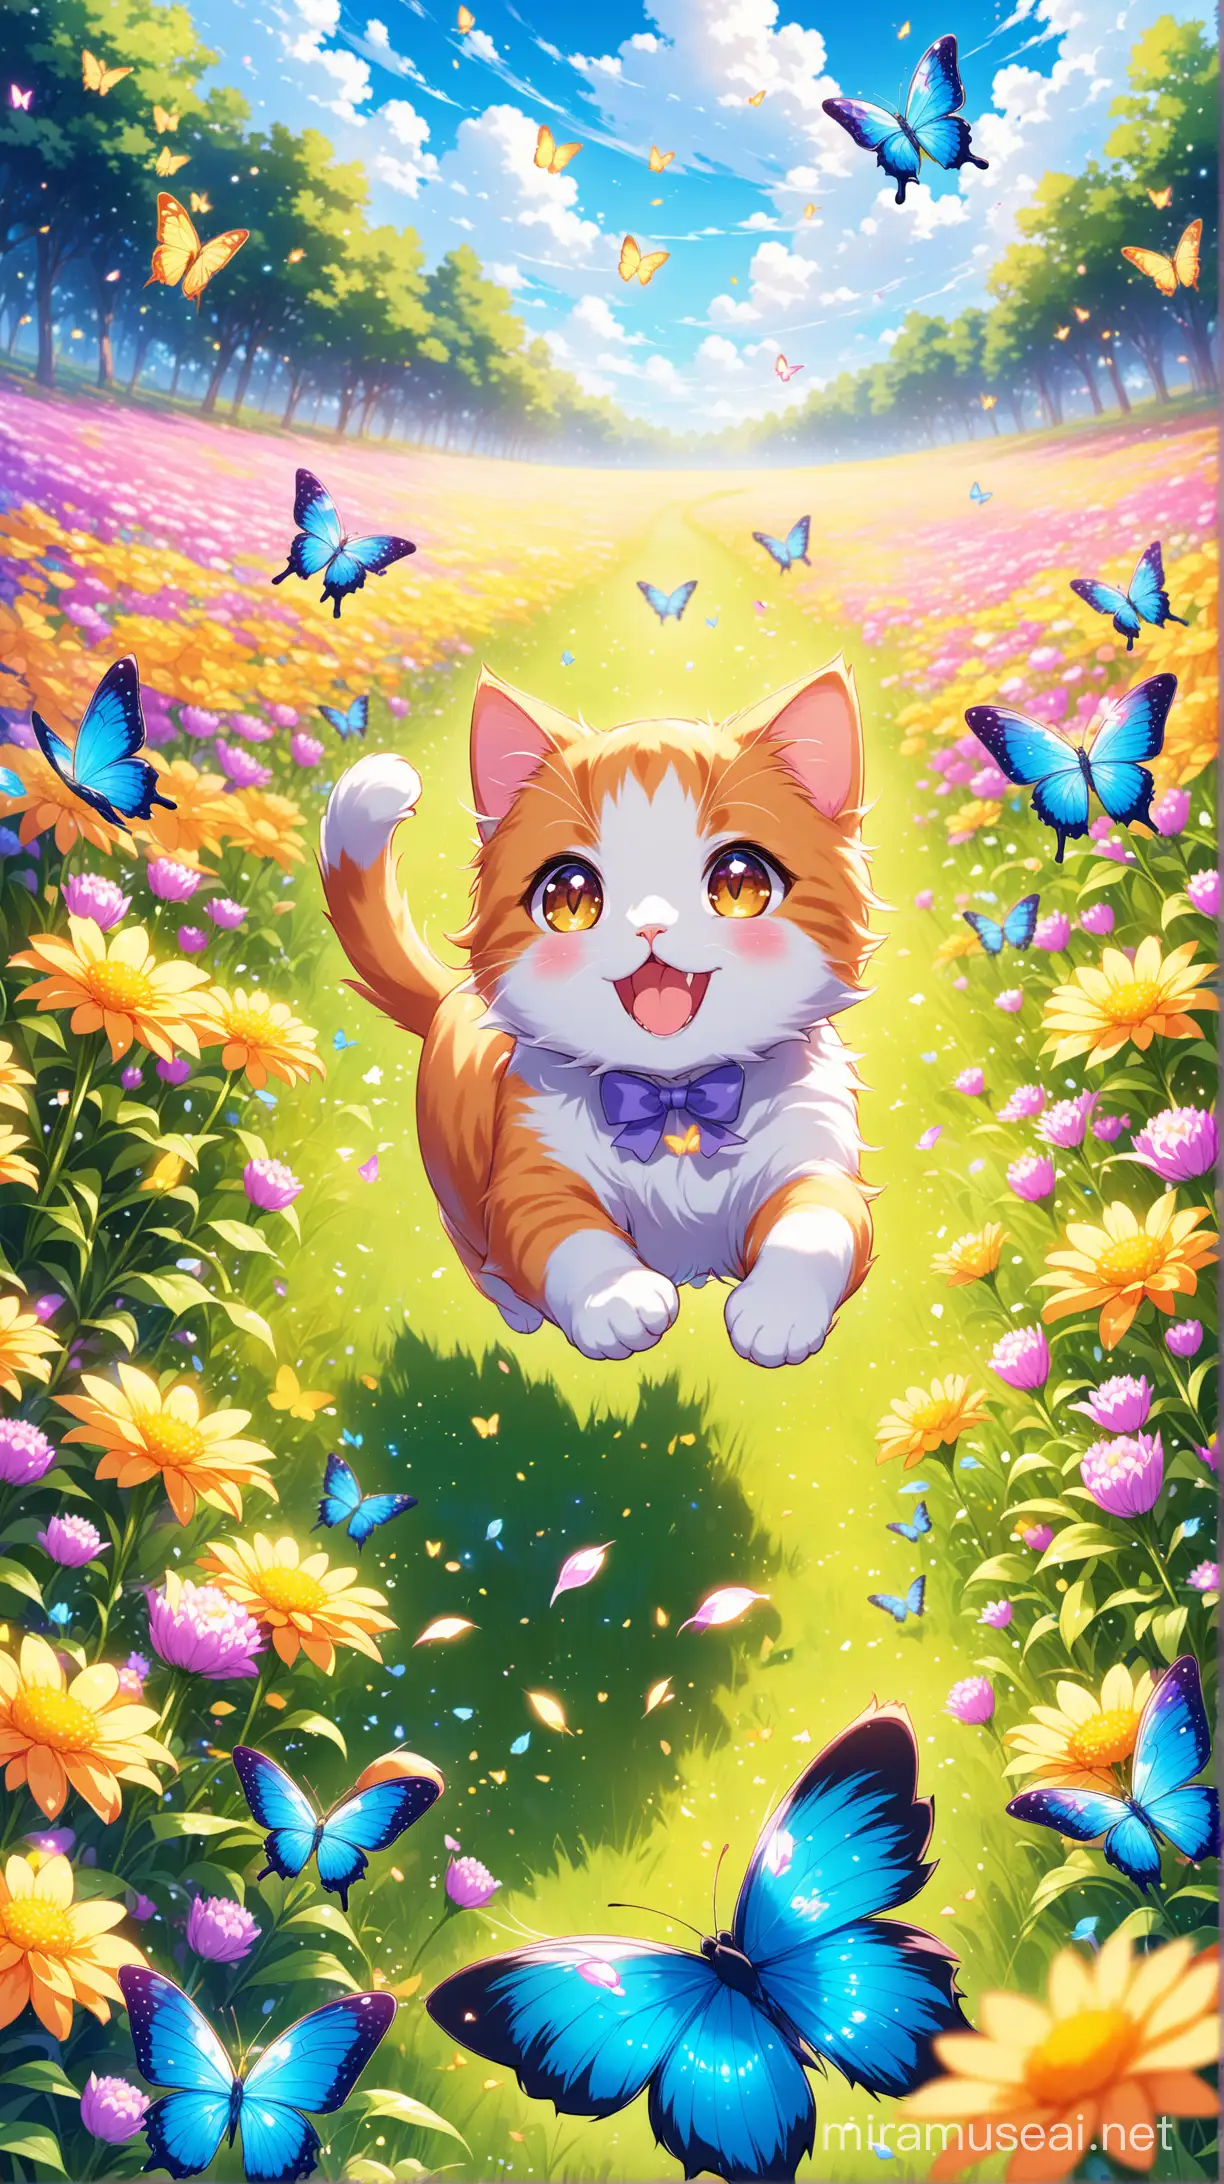 Anime Cat Frolicking Amidst Colorful Butterflies in Flower Field